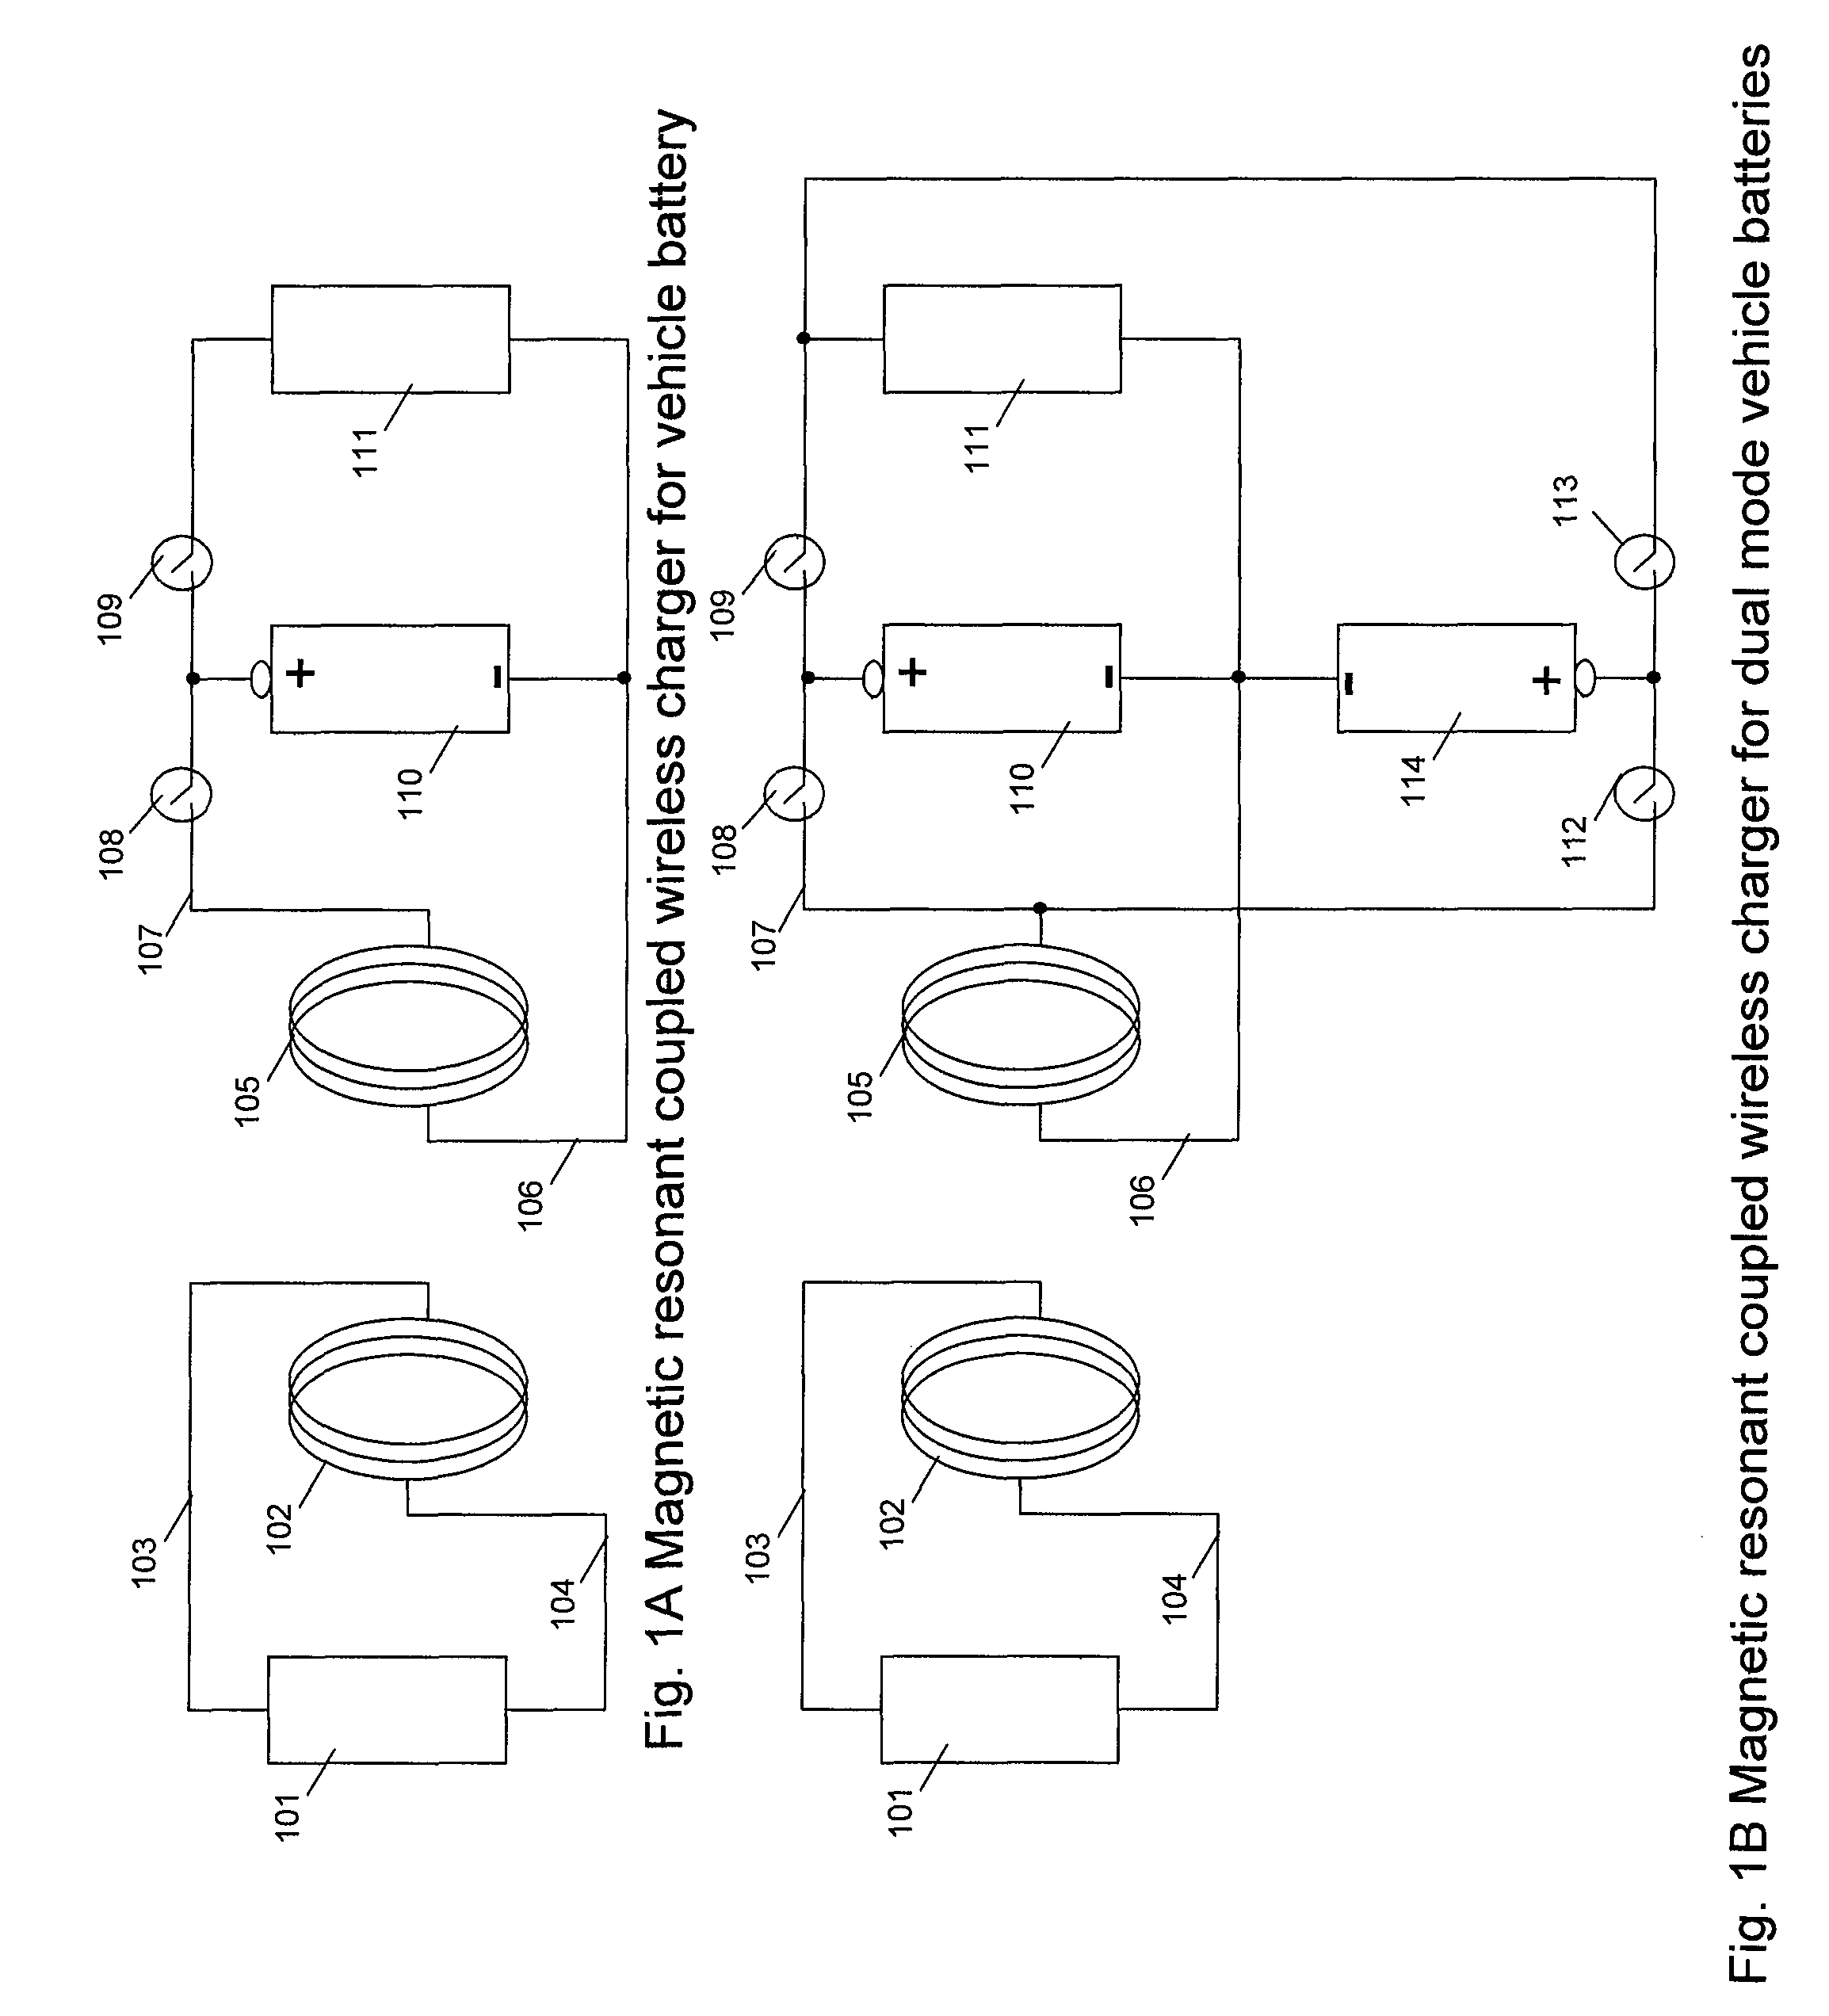 Wireless charging system for vehicles